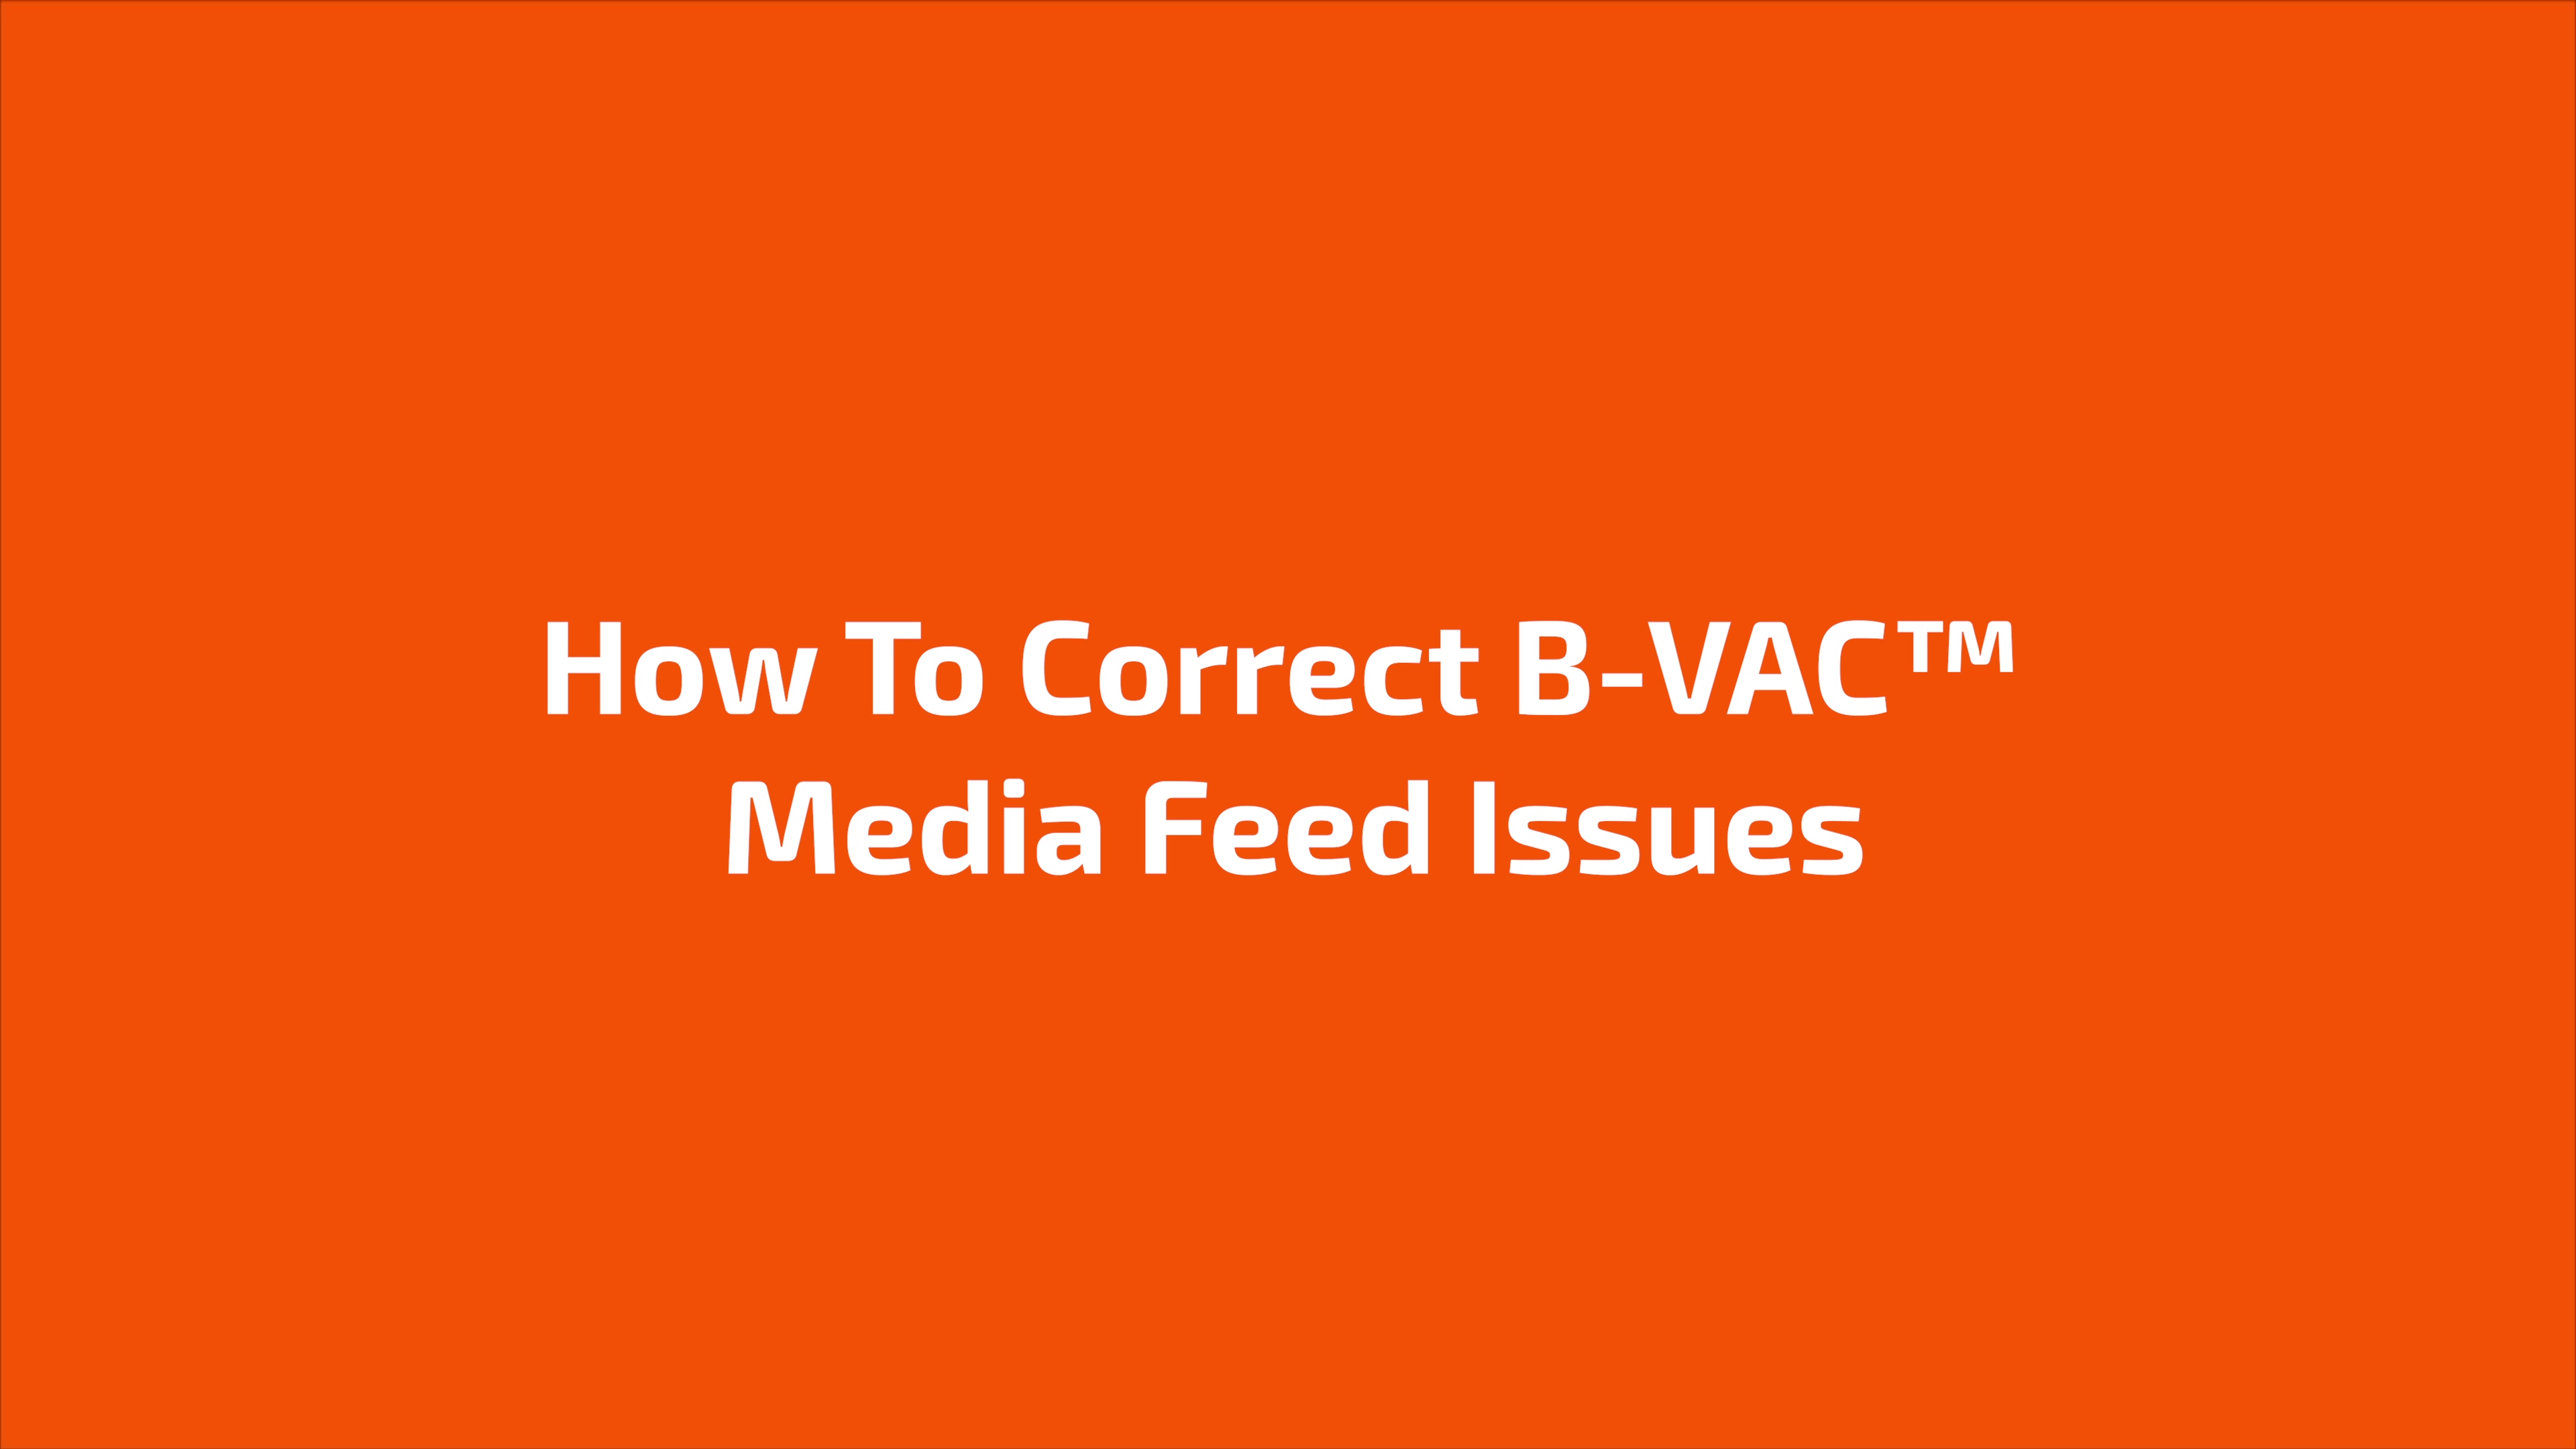 How To Correct B-VAC Media Feed Issues